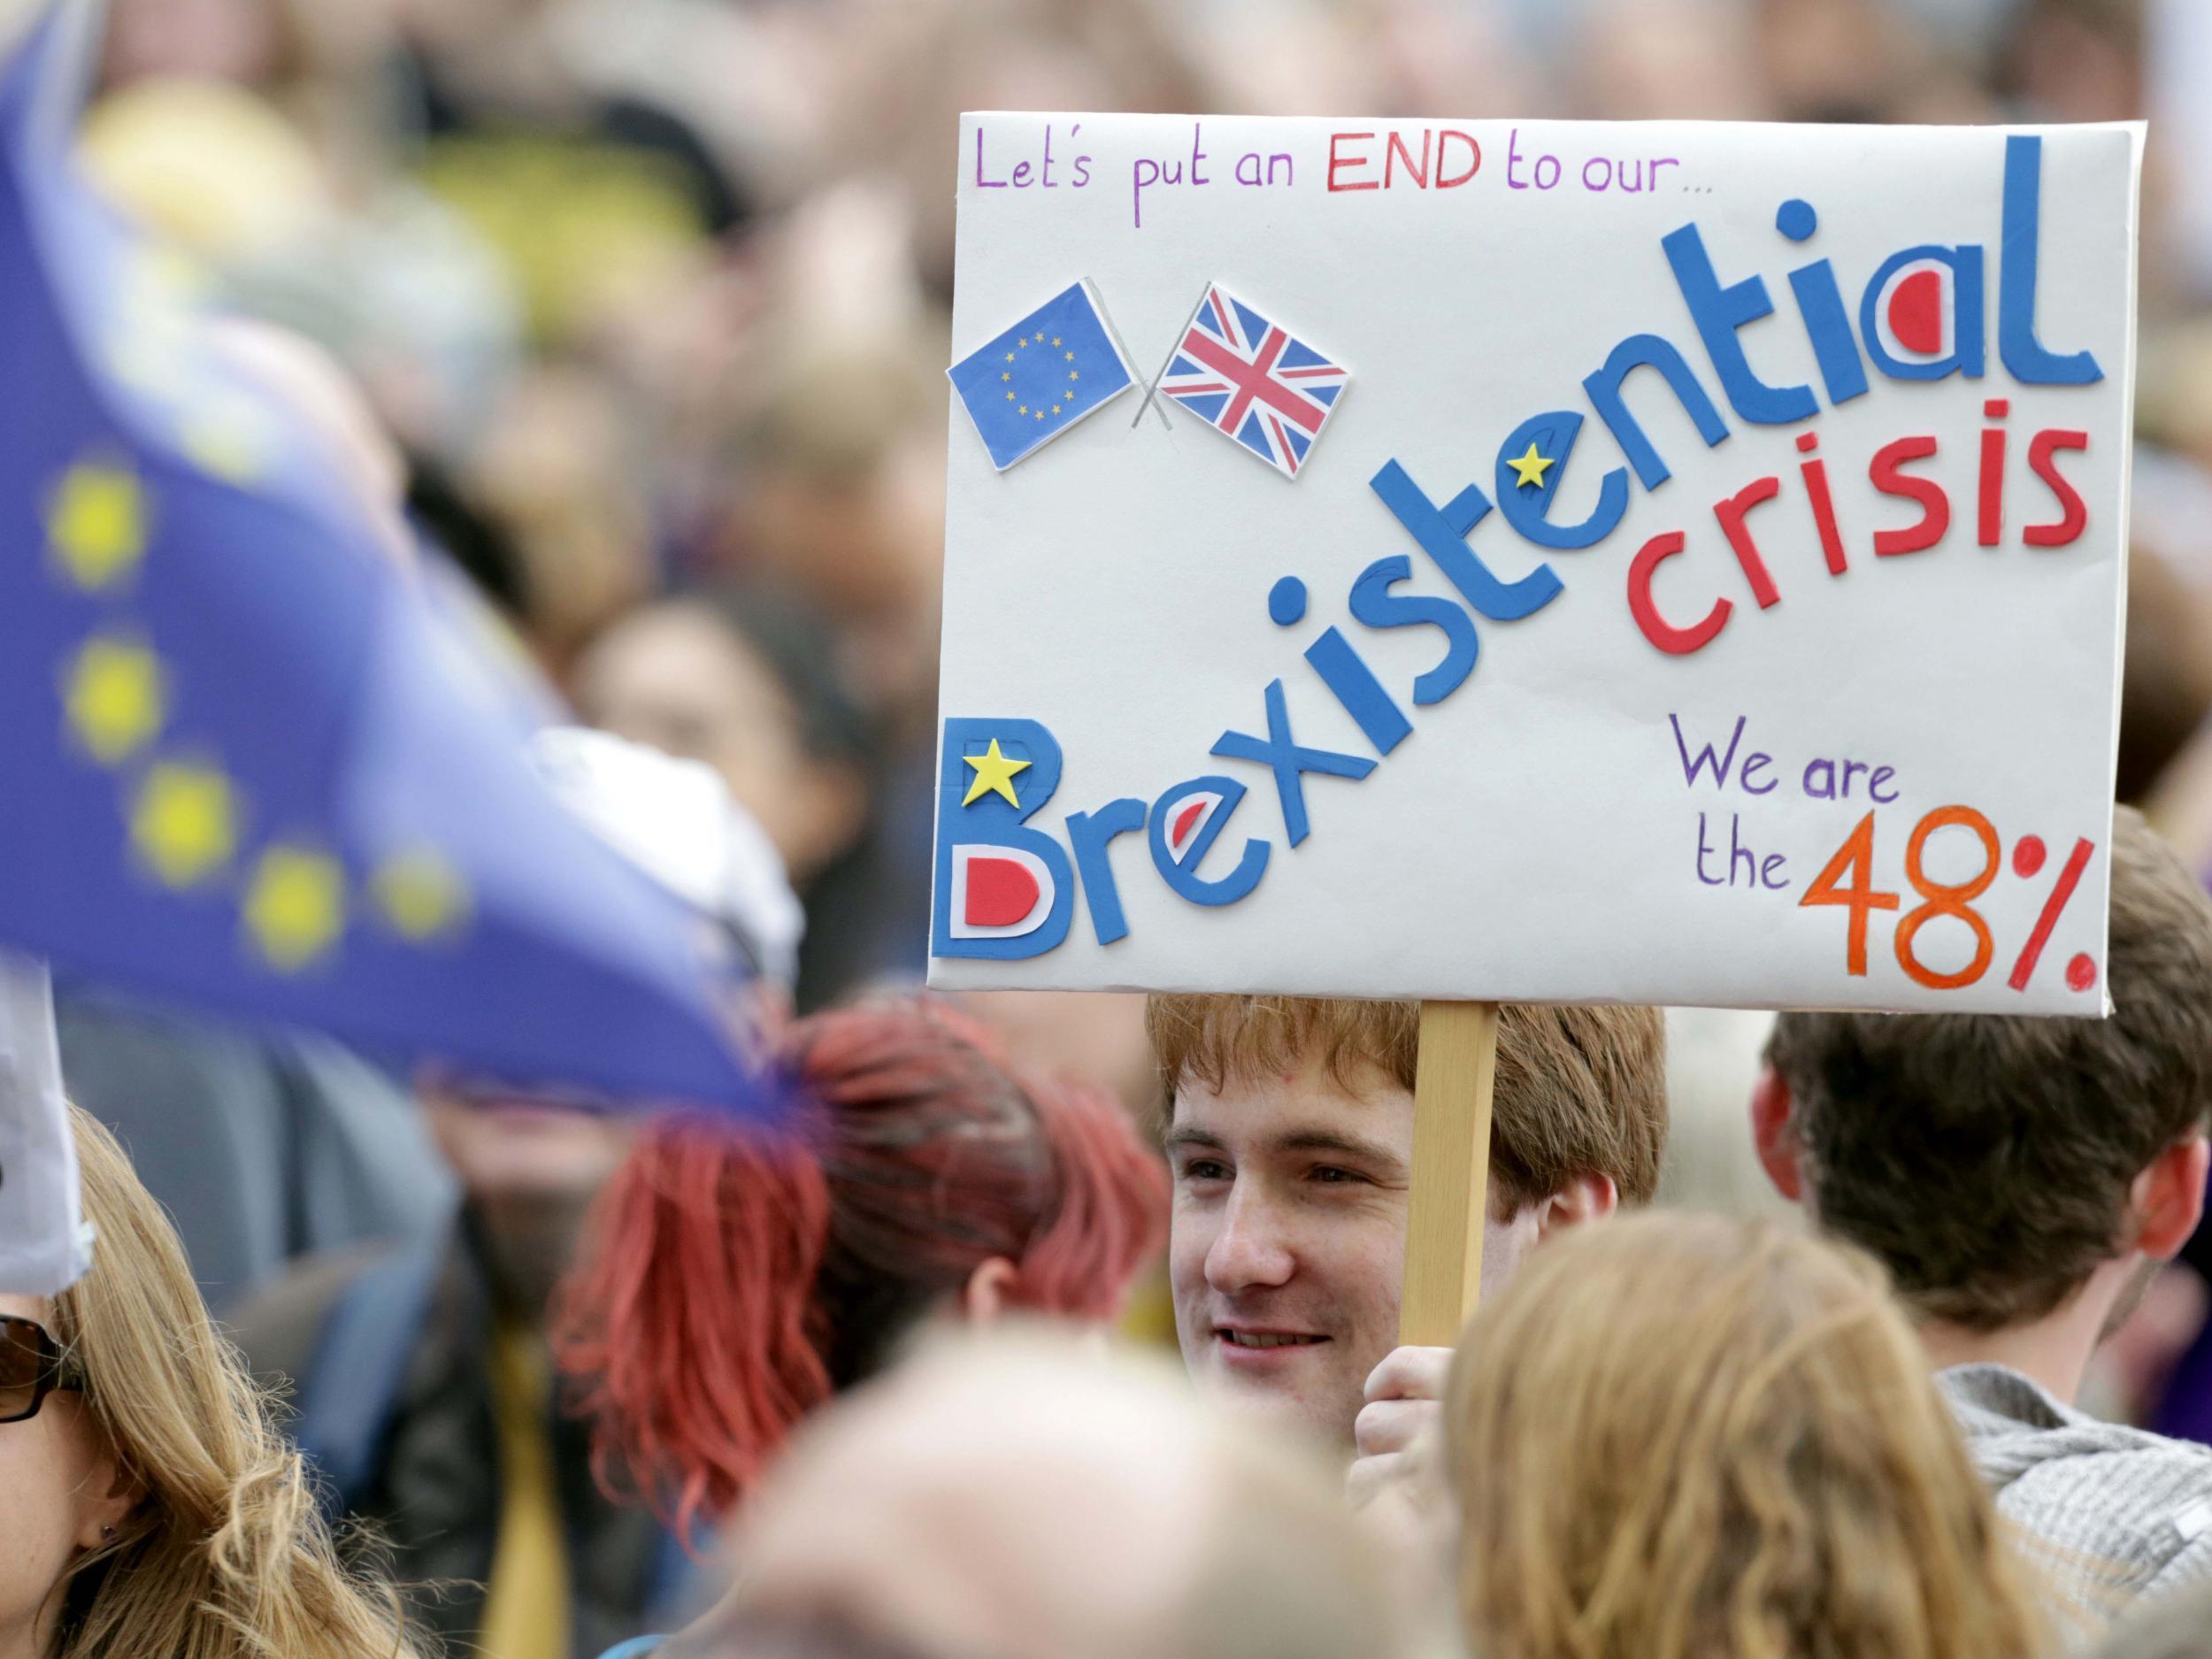 The 48 per cent of voters who opted to Remain in the EU have a democratic right to protest and challenge the majority vote